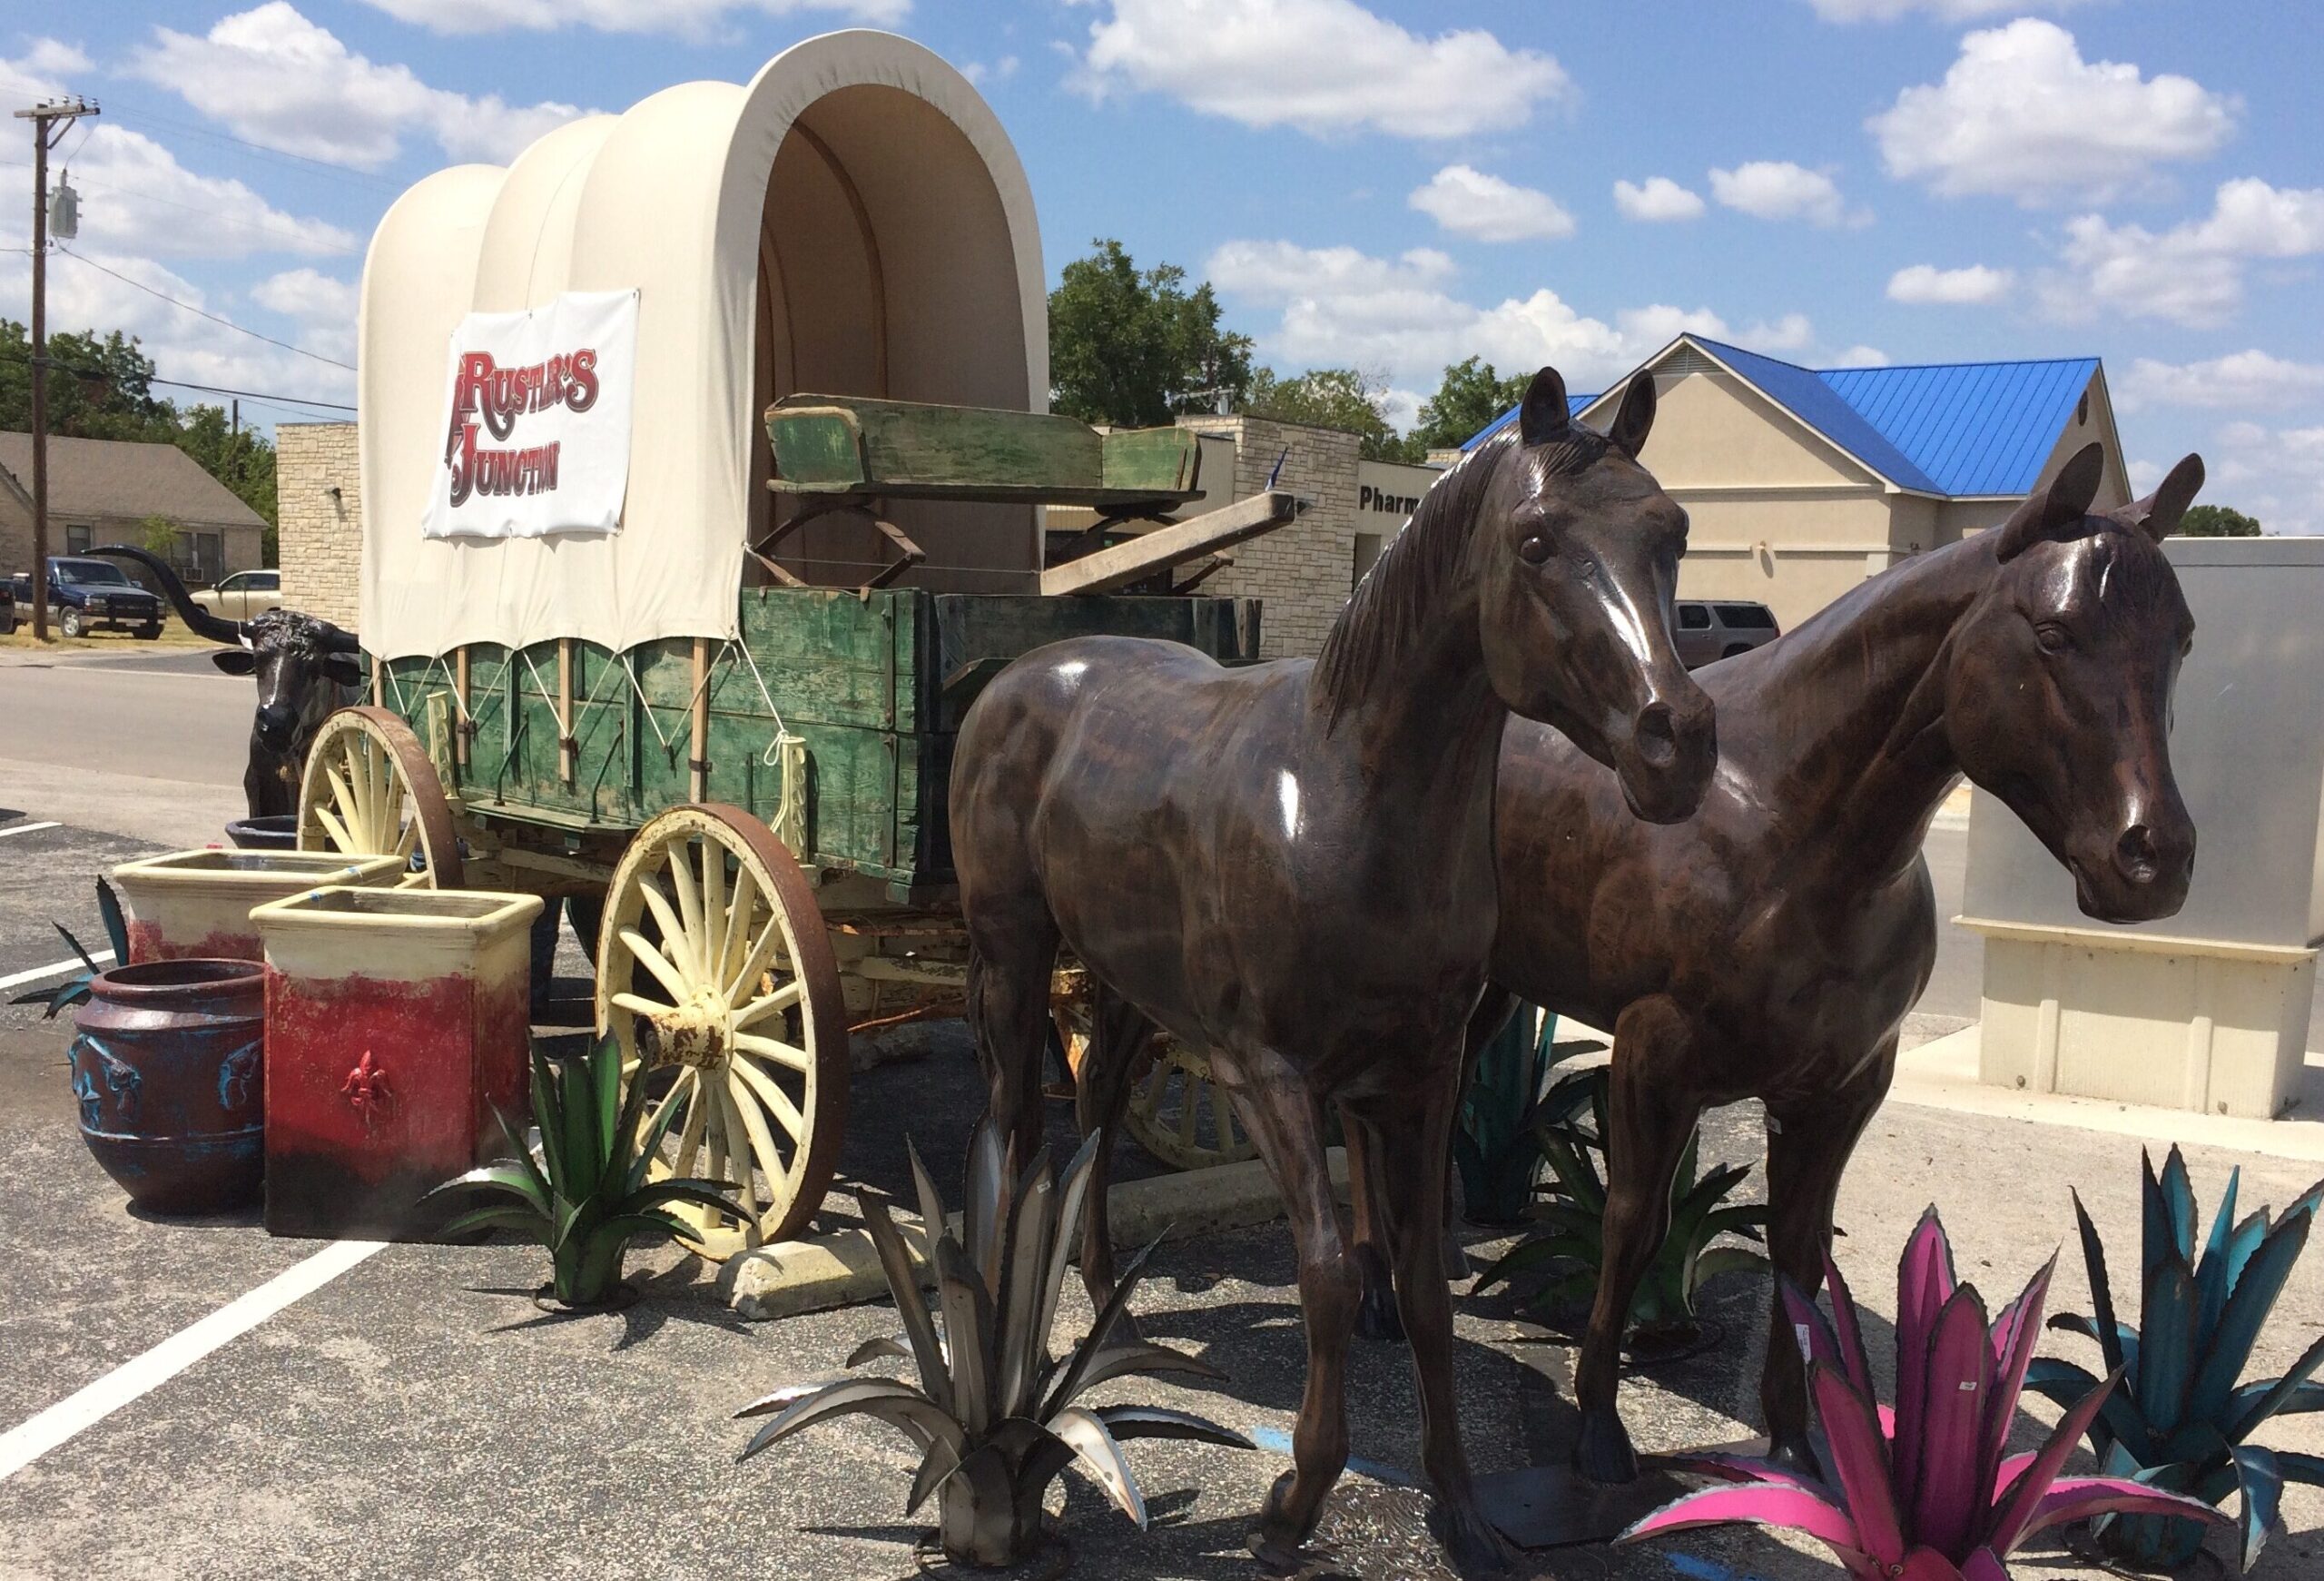 Horse statues pulling wagon at Rustler's Junction in Lampasas, TX. Don't miss out on our Always Awesome deliveries!